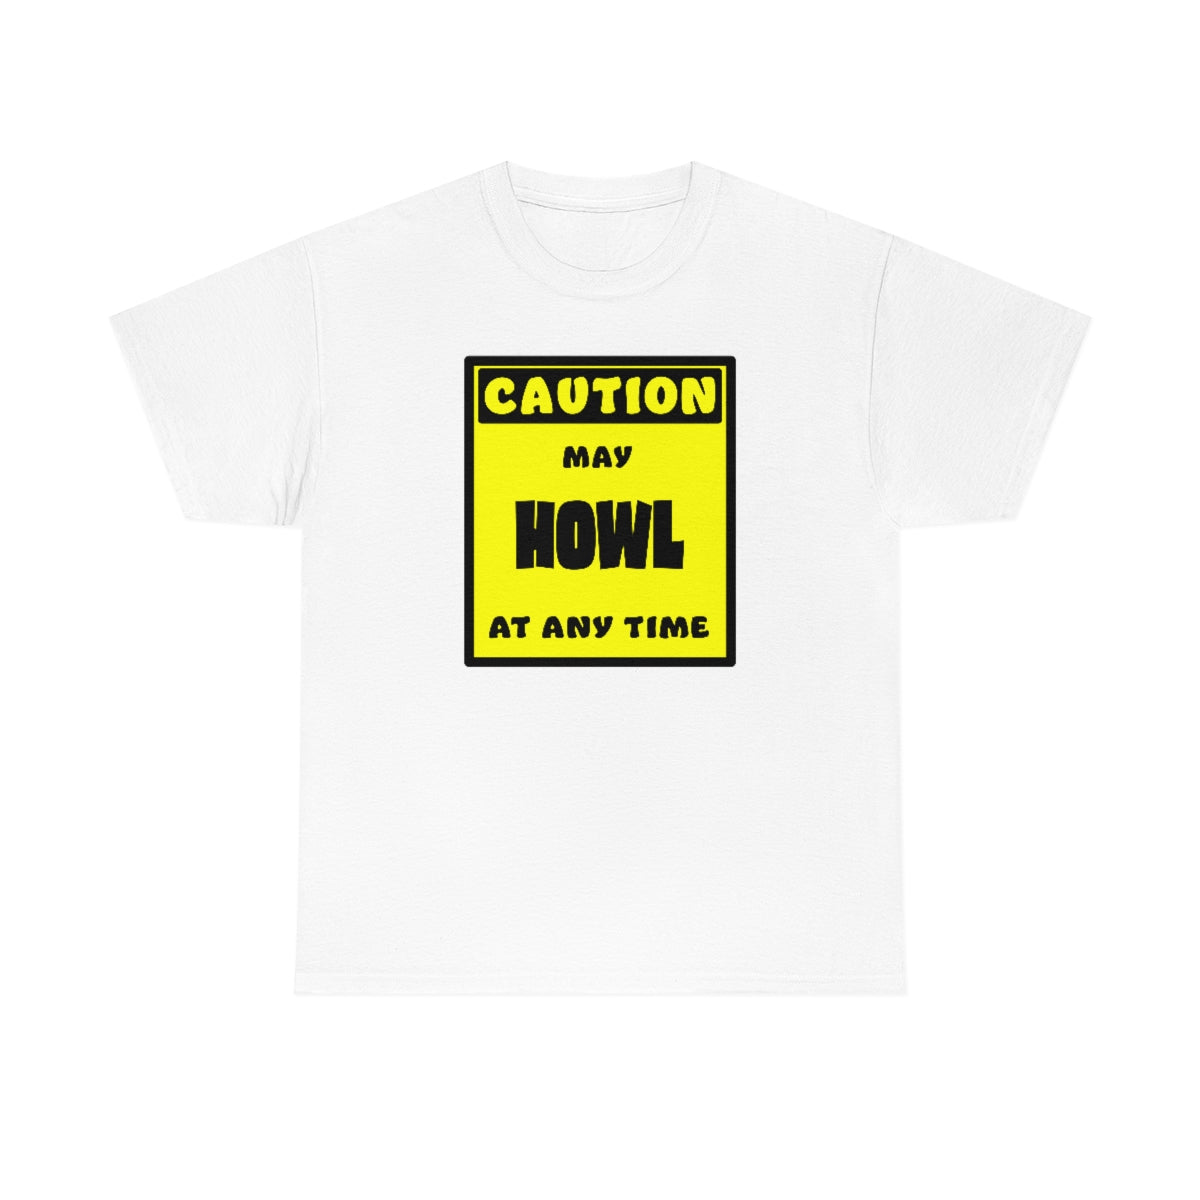 CAUTION! May HOWL at any time! - T-Shirt T-Shirt AFLT-Whootorca White S 